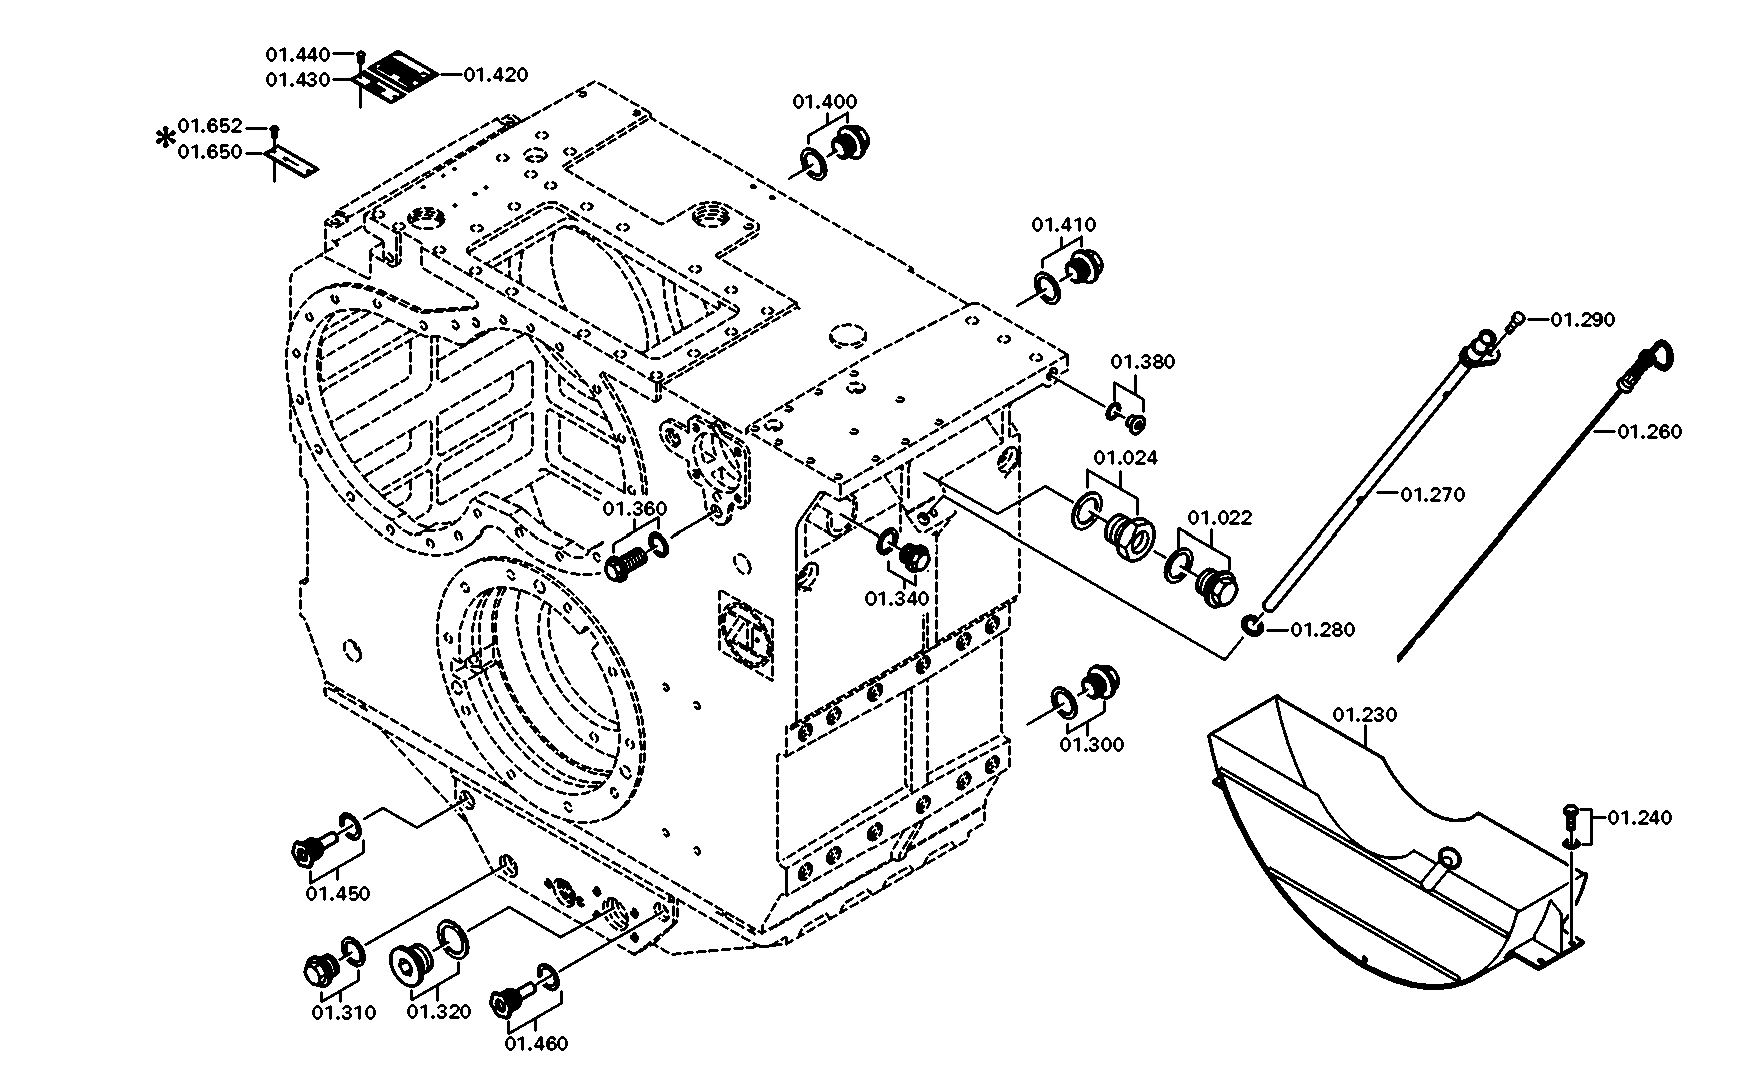 drawing for TEREX EQUIPMENT LIMITED 8001871 - HEXAGON SCREW (figure 5)